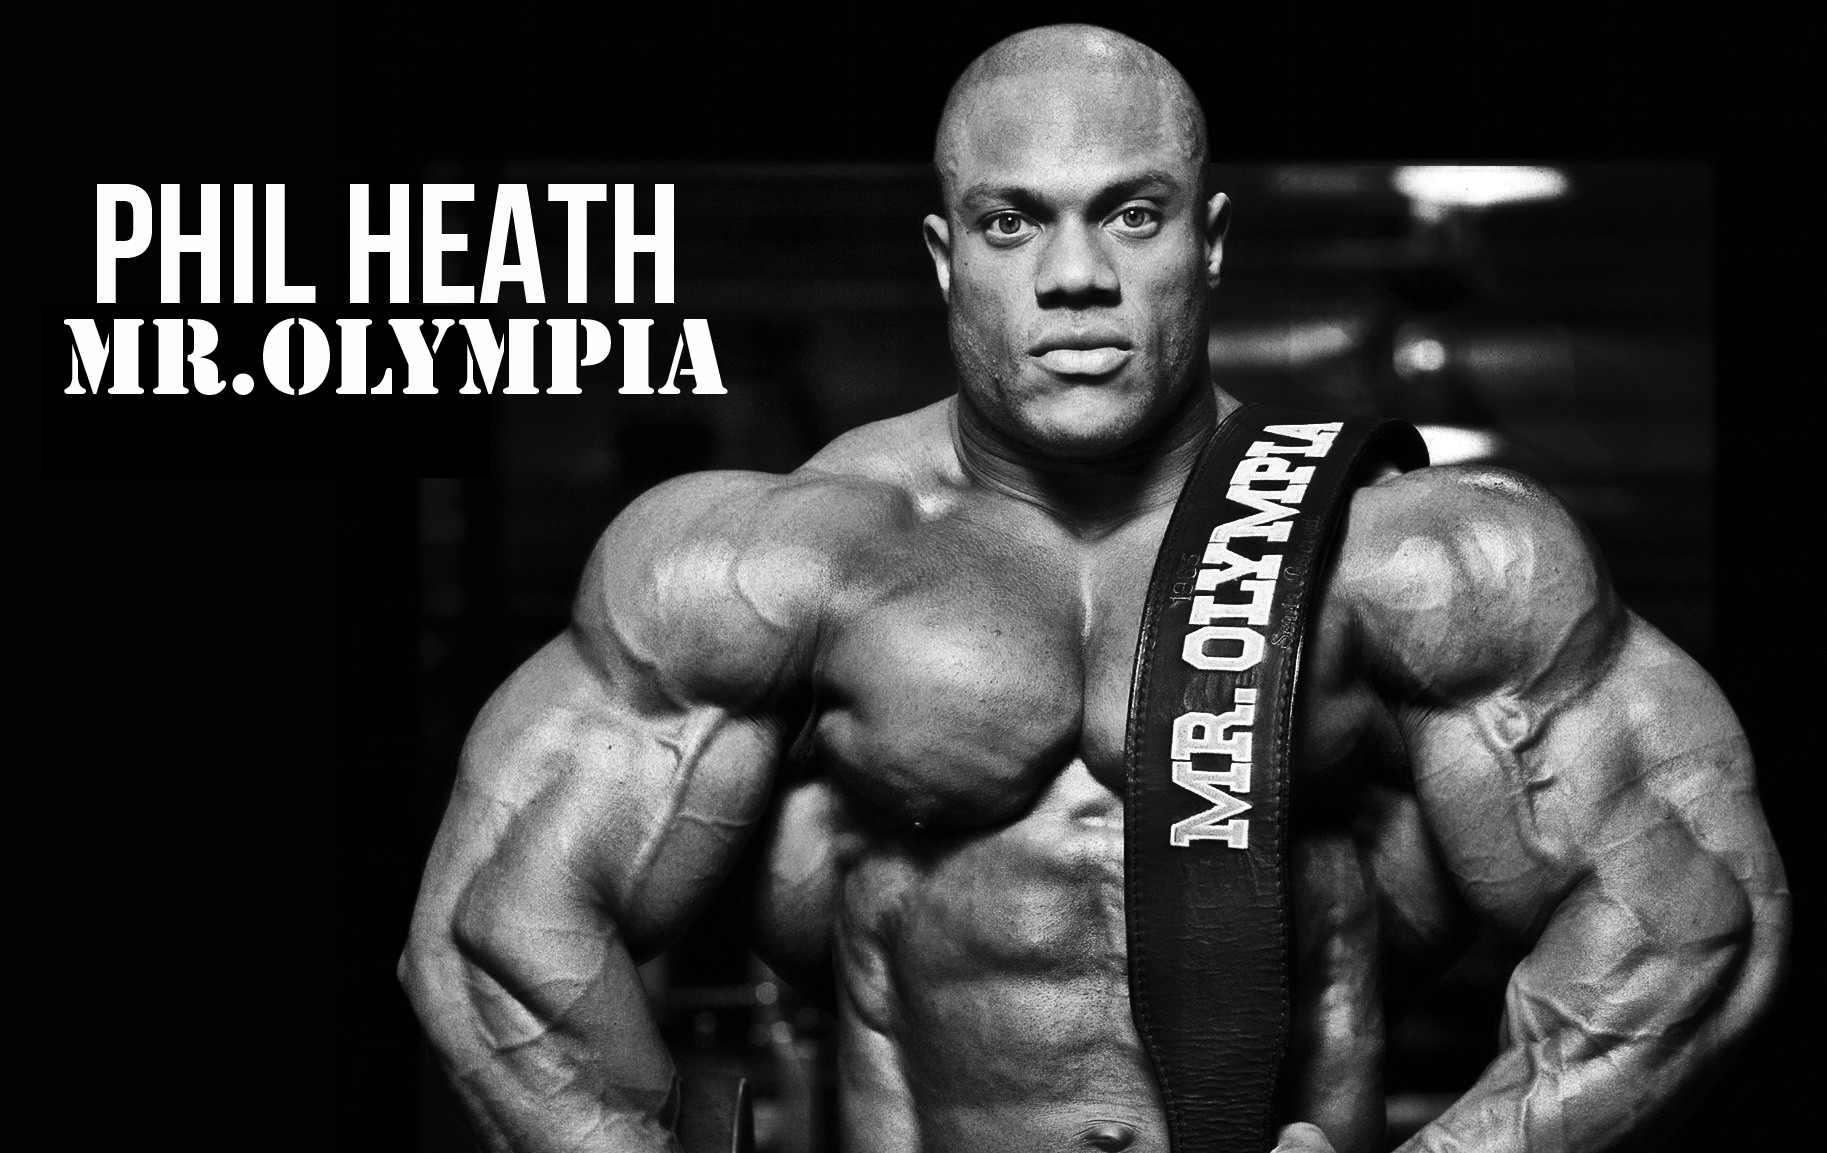 Mr. Olympia, Phil Heath's Workout Routine And Diet